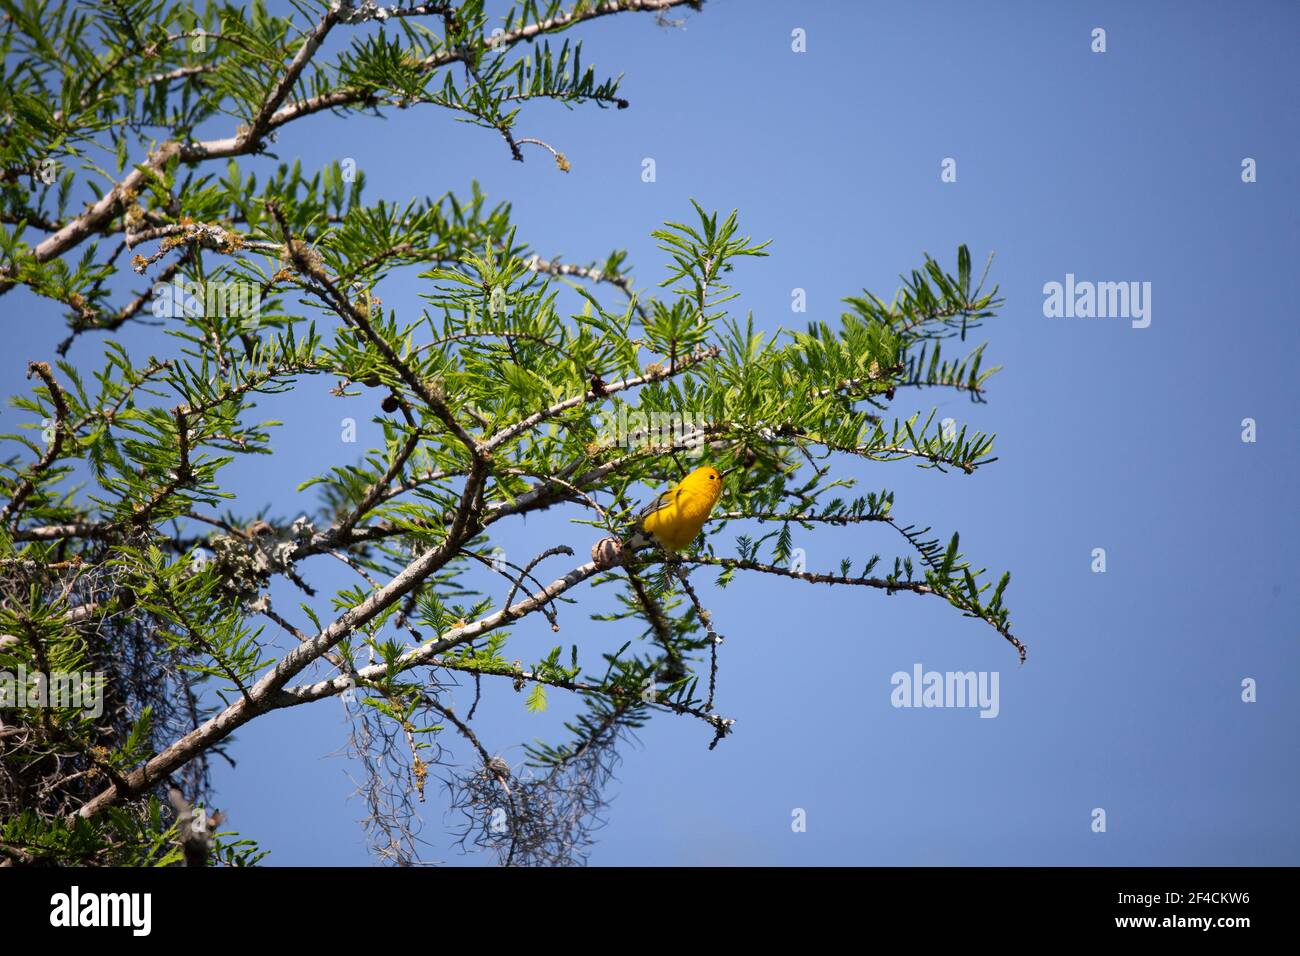 Prothonotary warbler (Protonotaria citrea) perched in a tree Stock Photo